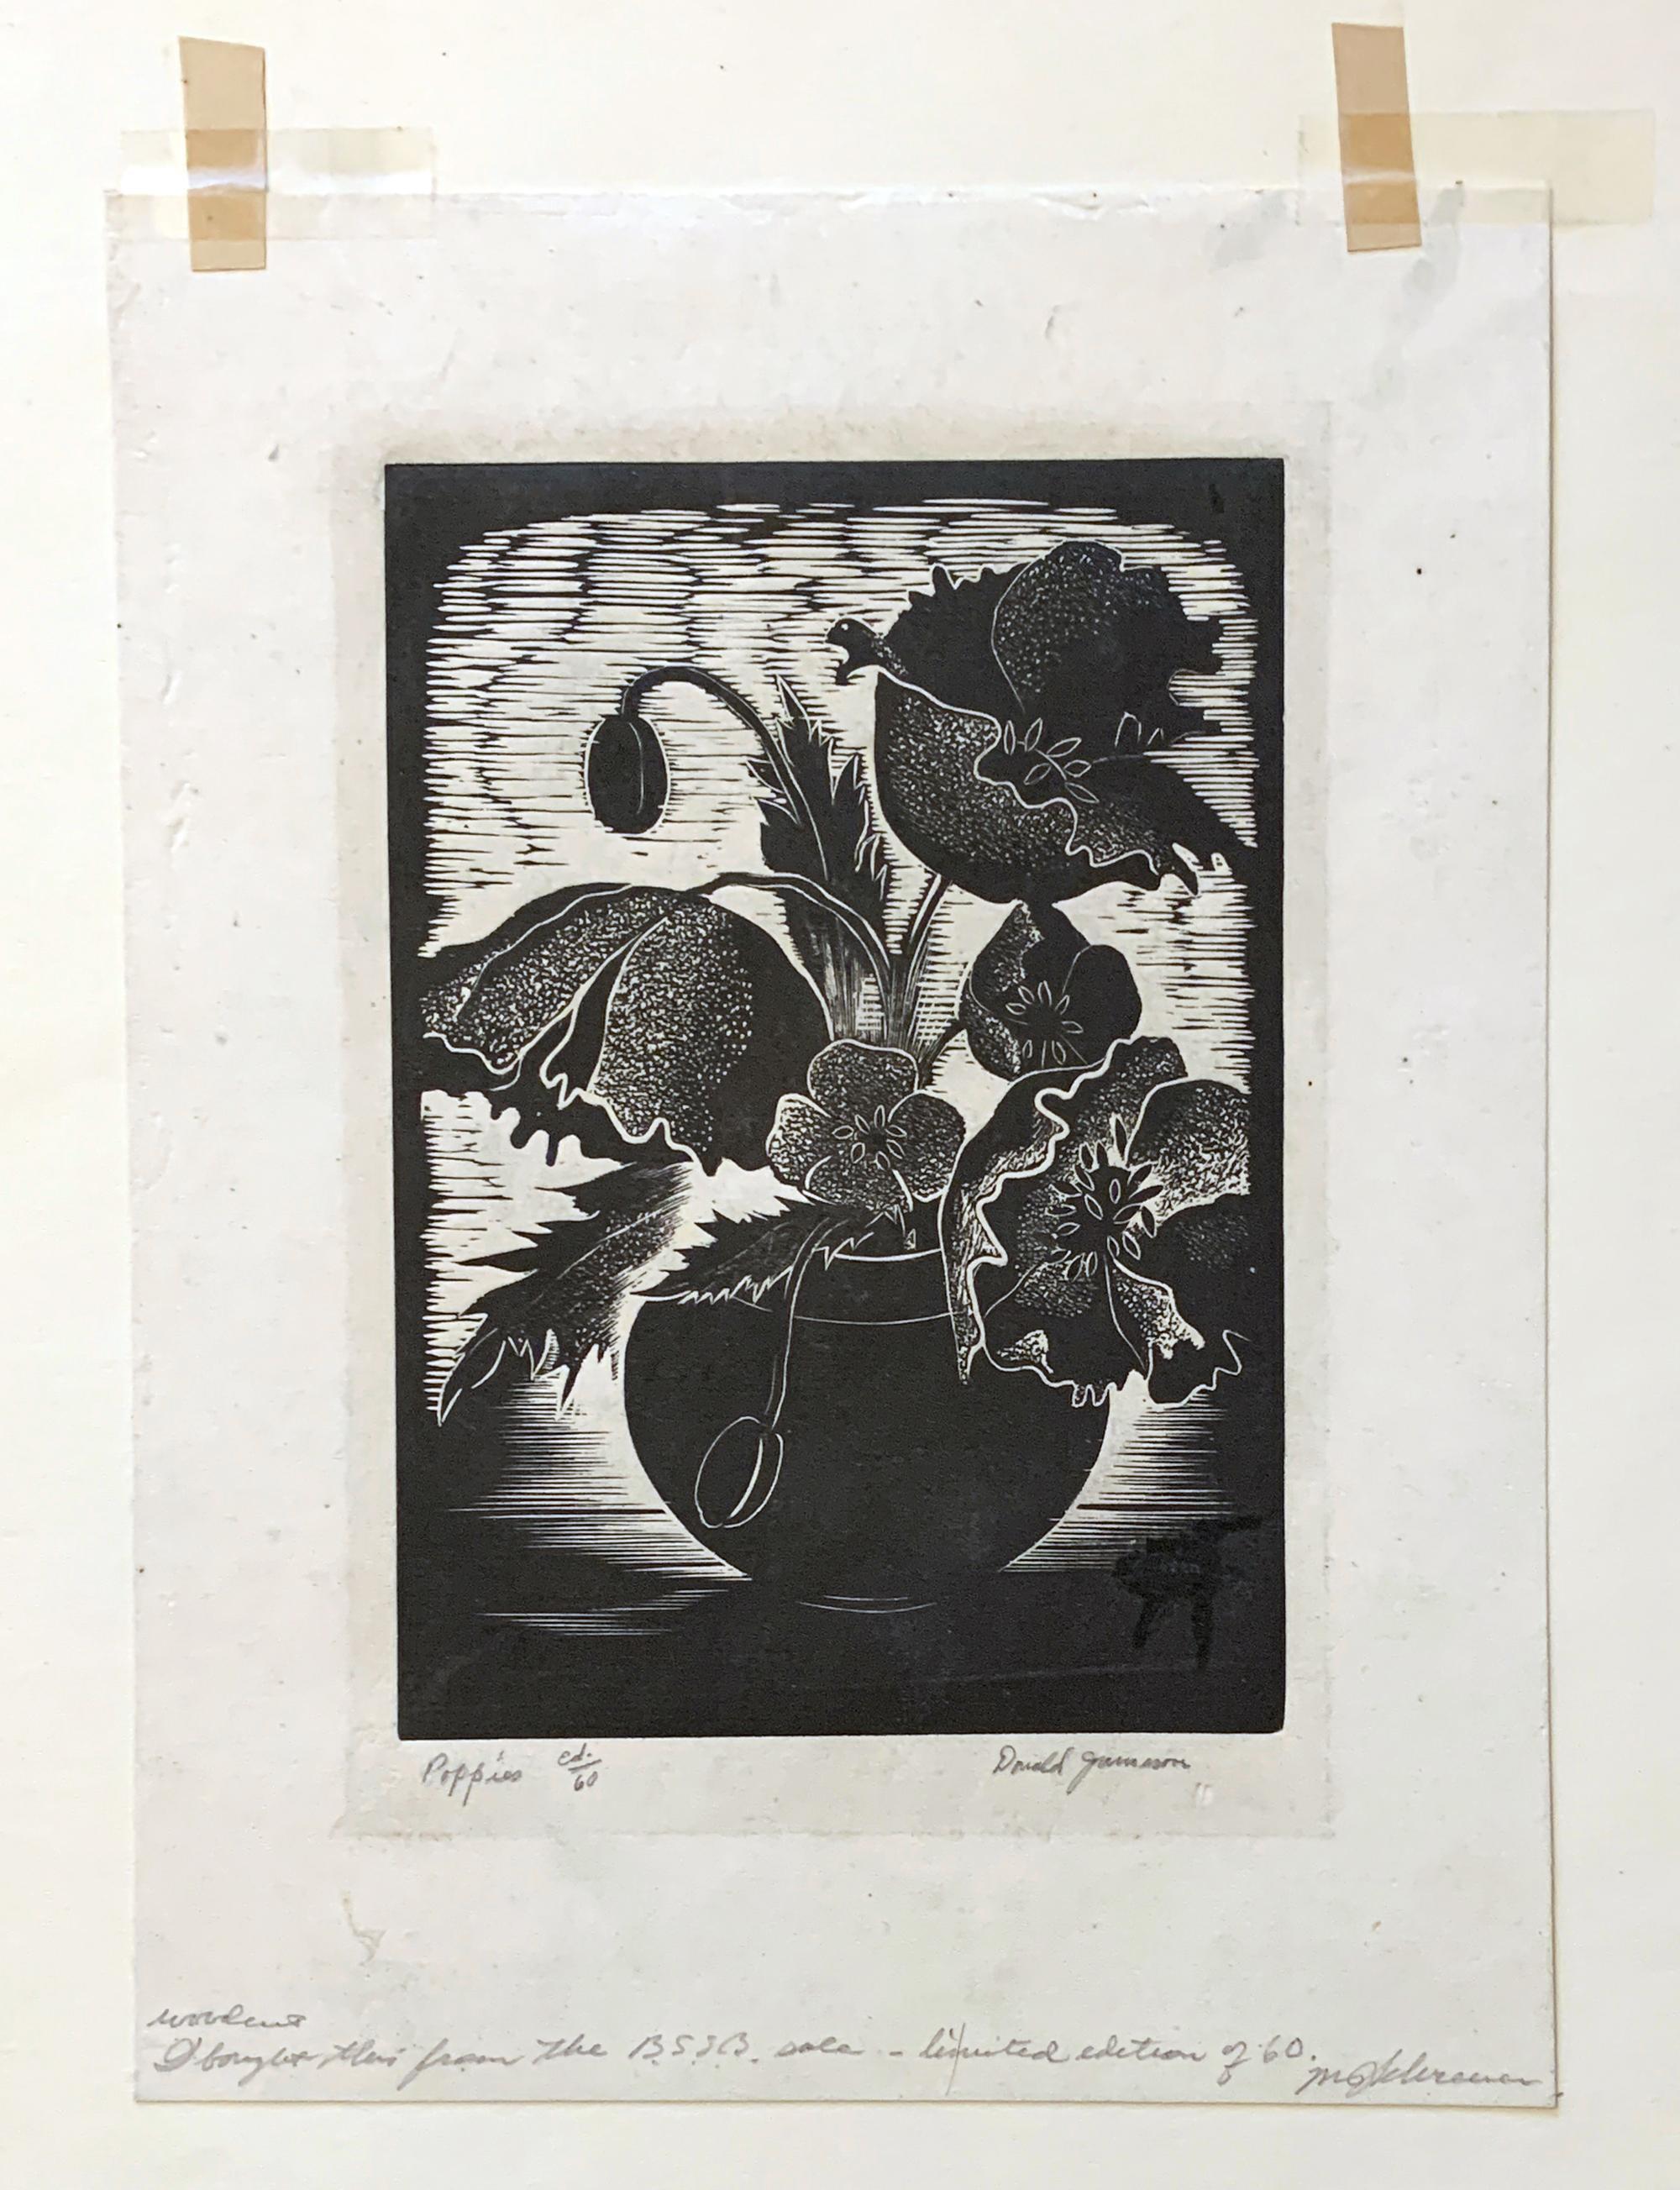 Original Still Life Limited Edition Woodblock Print by American artist Donald Jameson Entitled POPPIES  Hand signed, Titled and Numbered by the artist in lower margin  Limited Edition of 60  Commissioned by publication (BSSB)  Approx. Size: 9